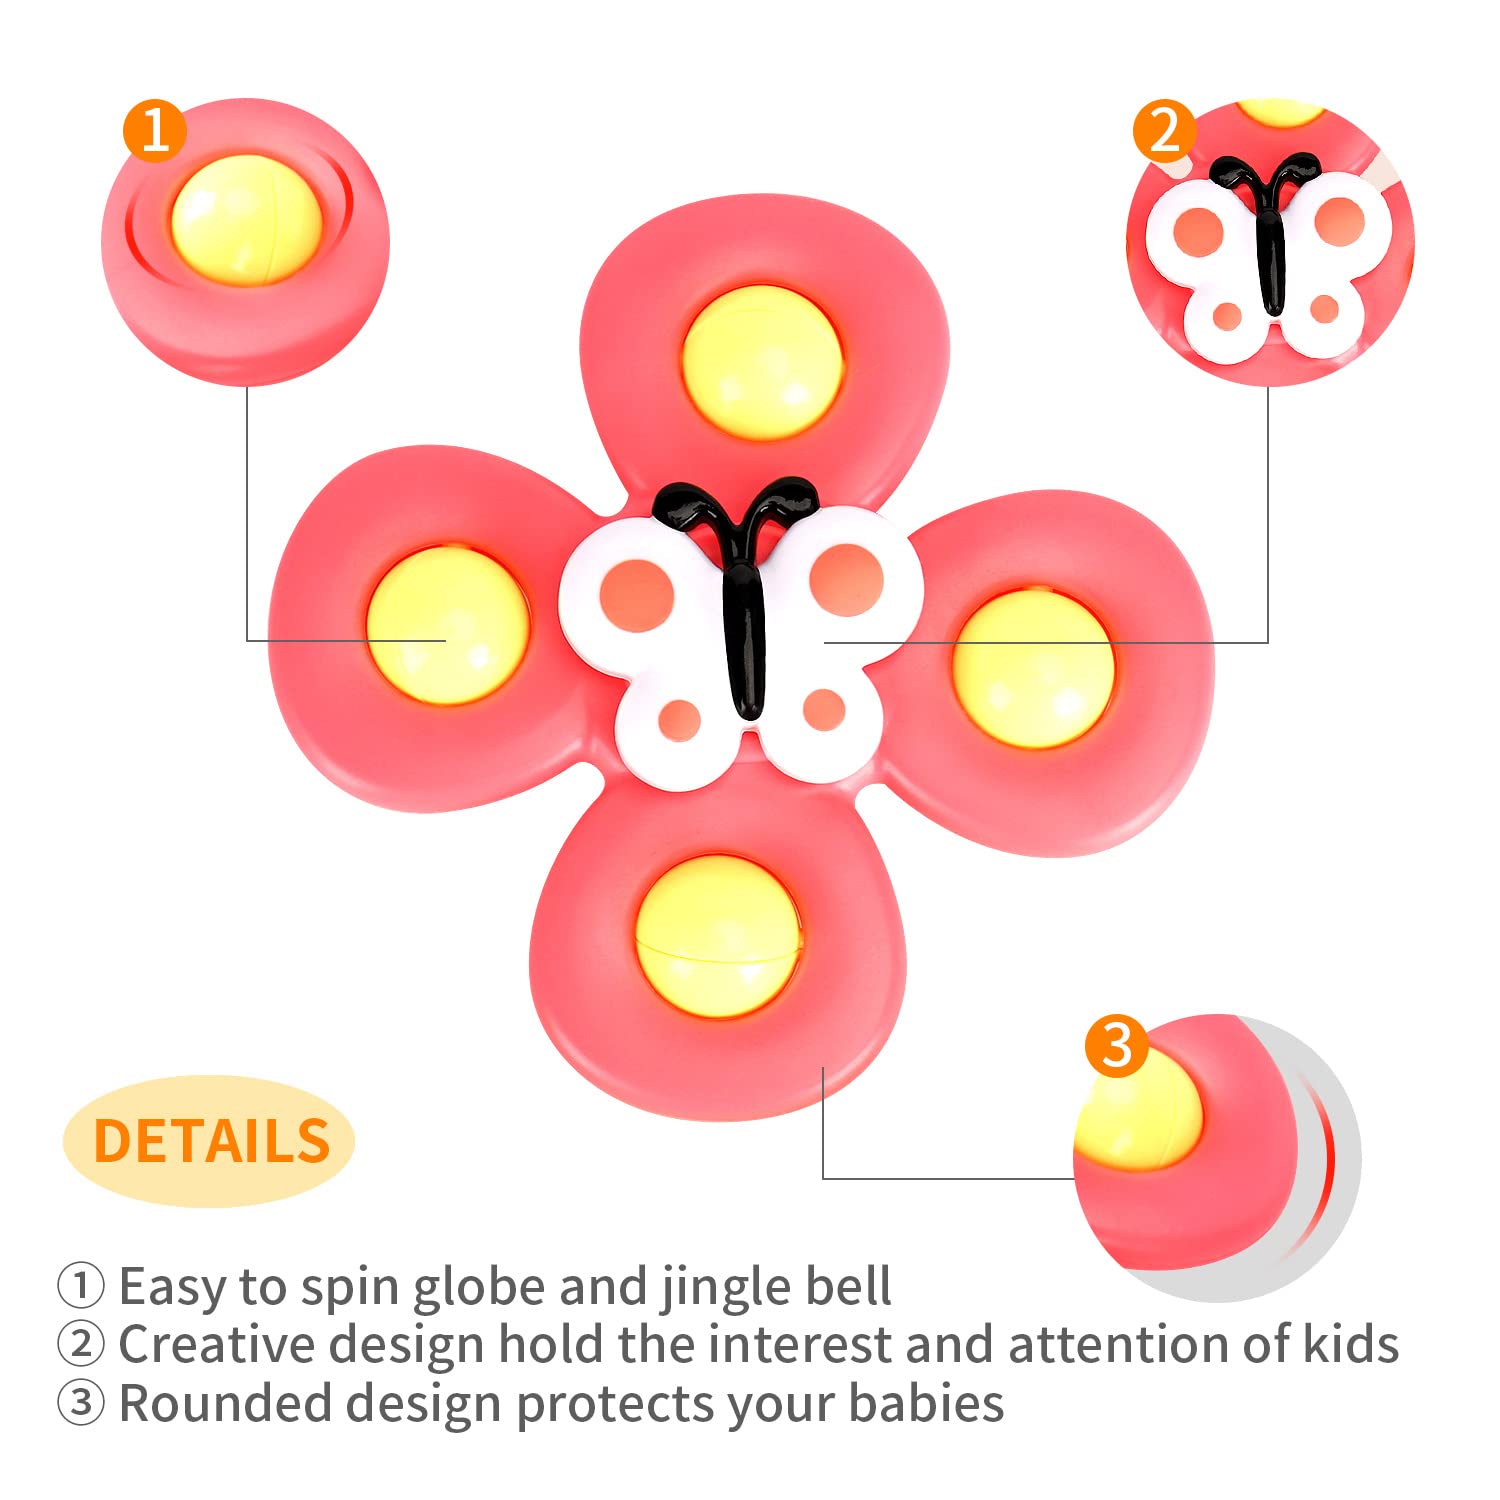 6 PCS Suction Cup Spinner Toys(3 Farm+3 POP) for Infant and Toddlers